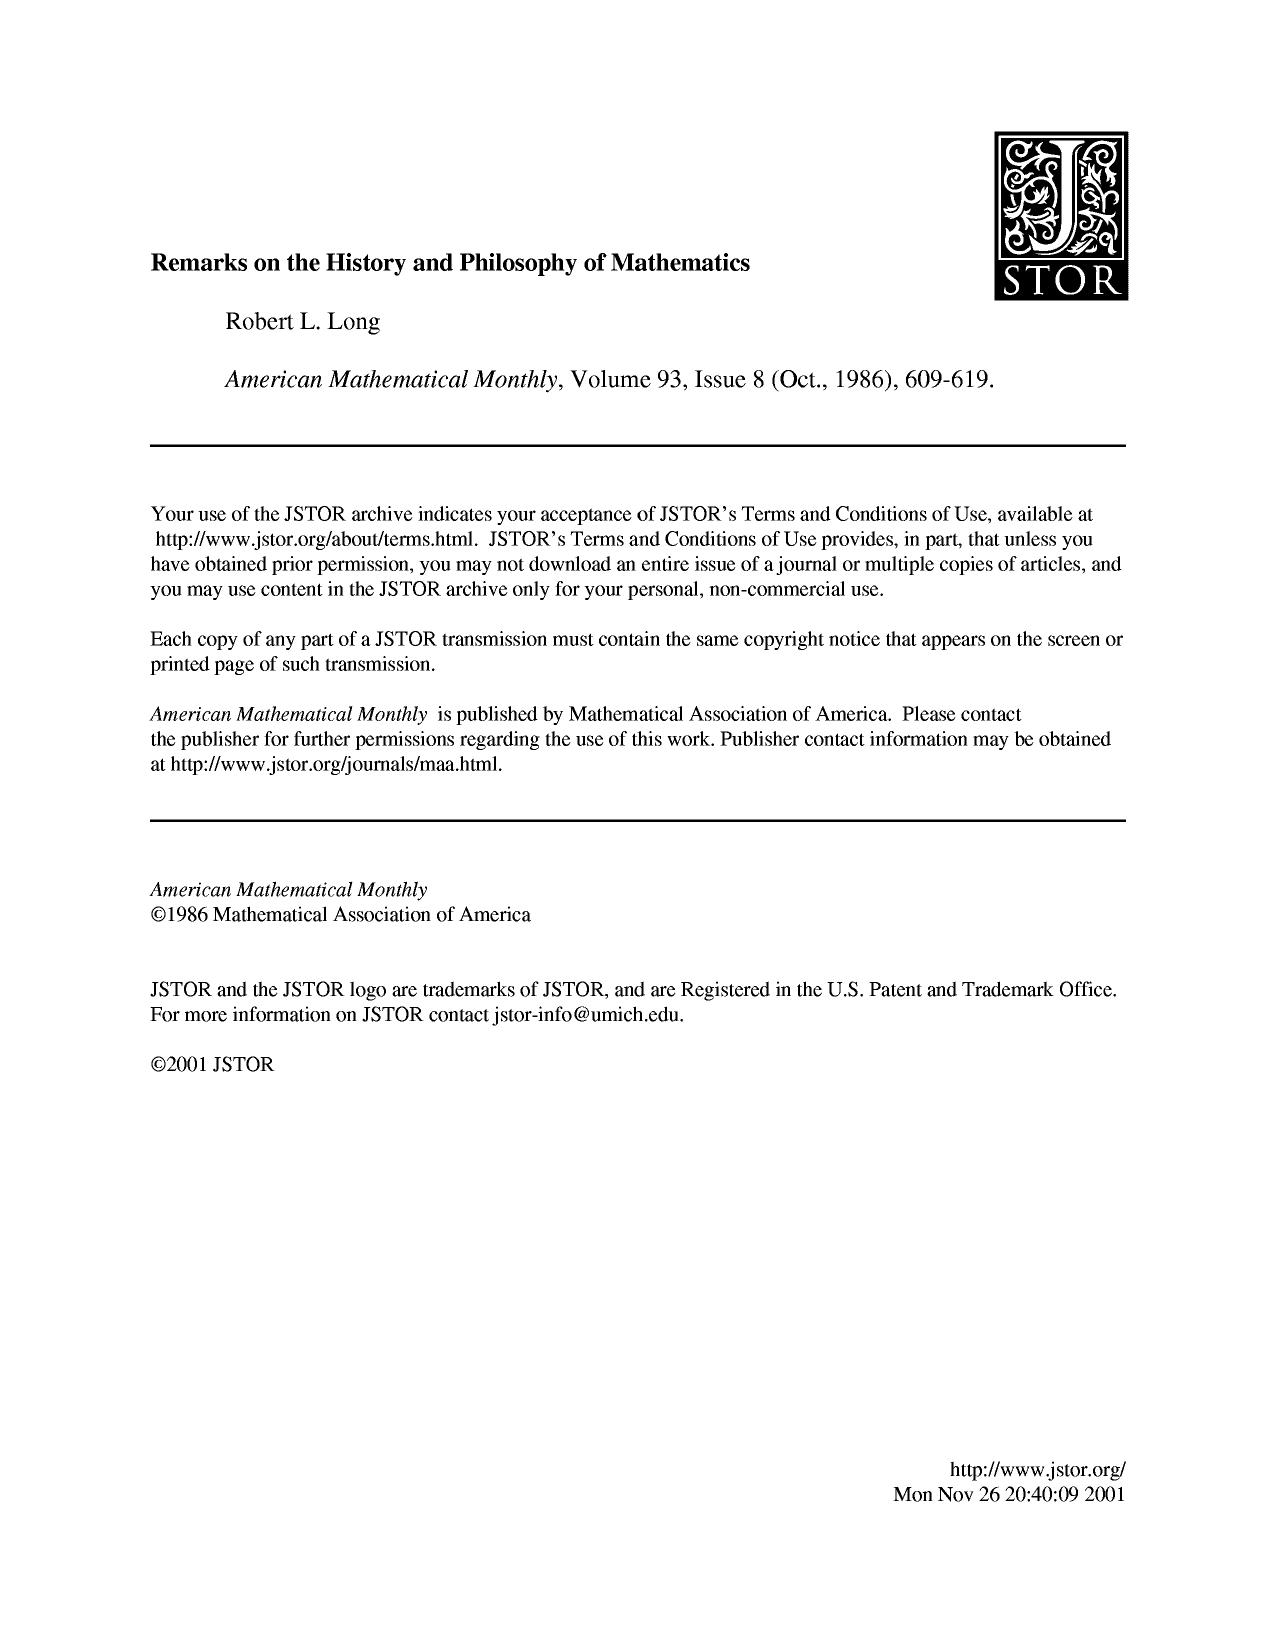 Remarks on the History and Philosophy of Mathematics - Essay